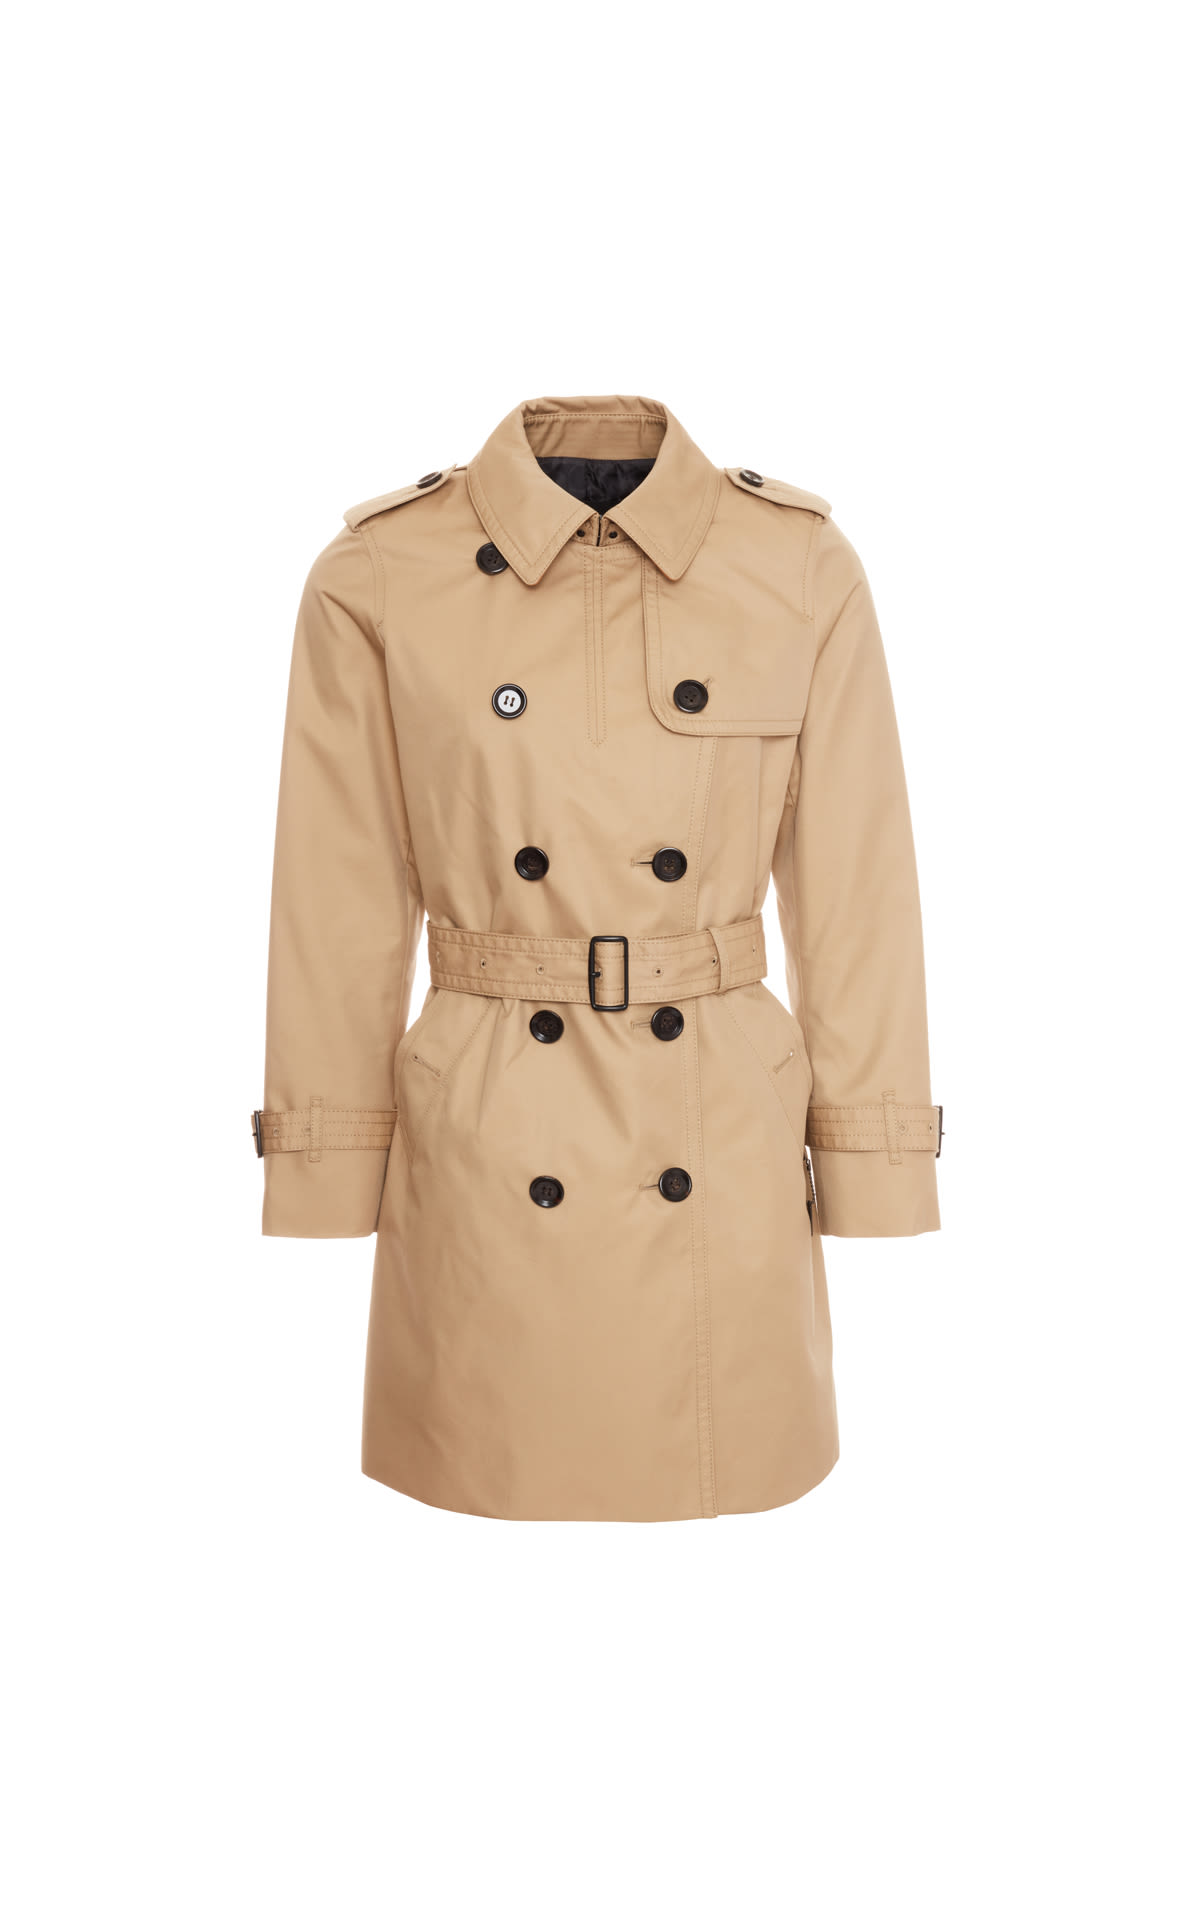 Coach Khaki mid length trench from Bicester Village